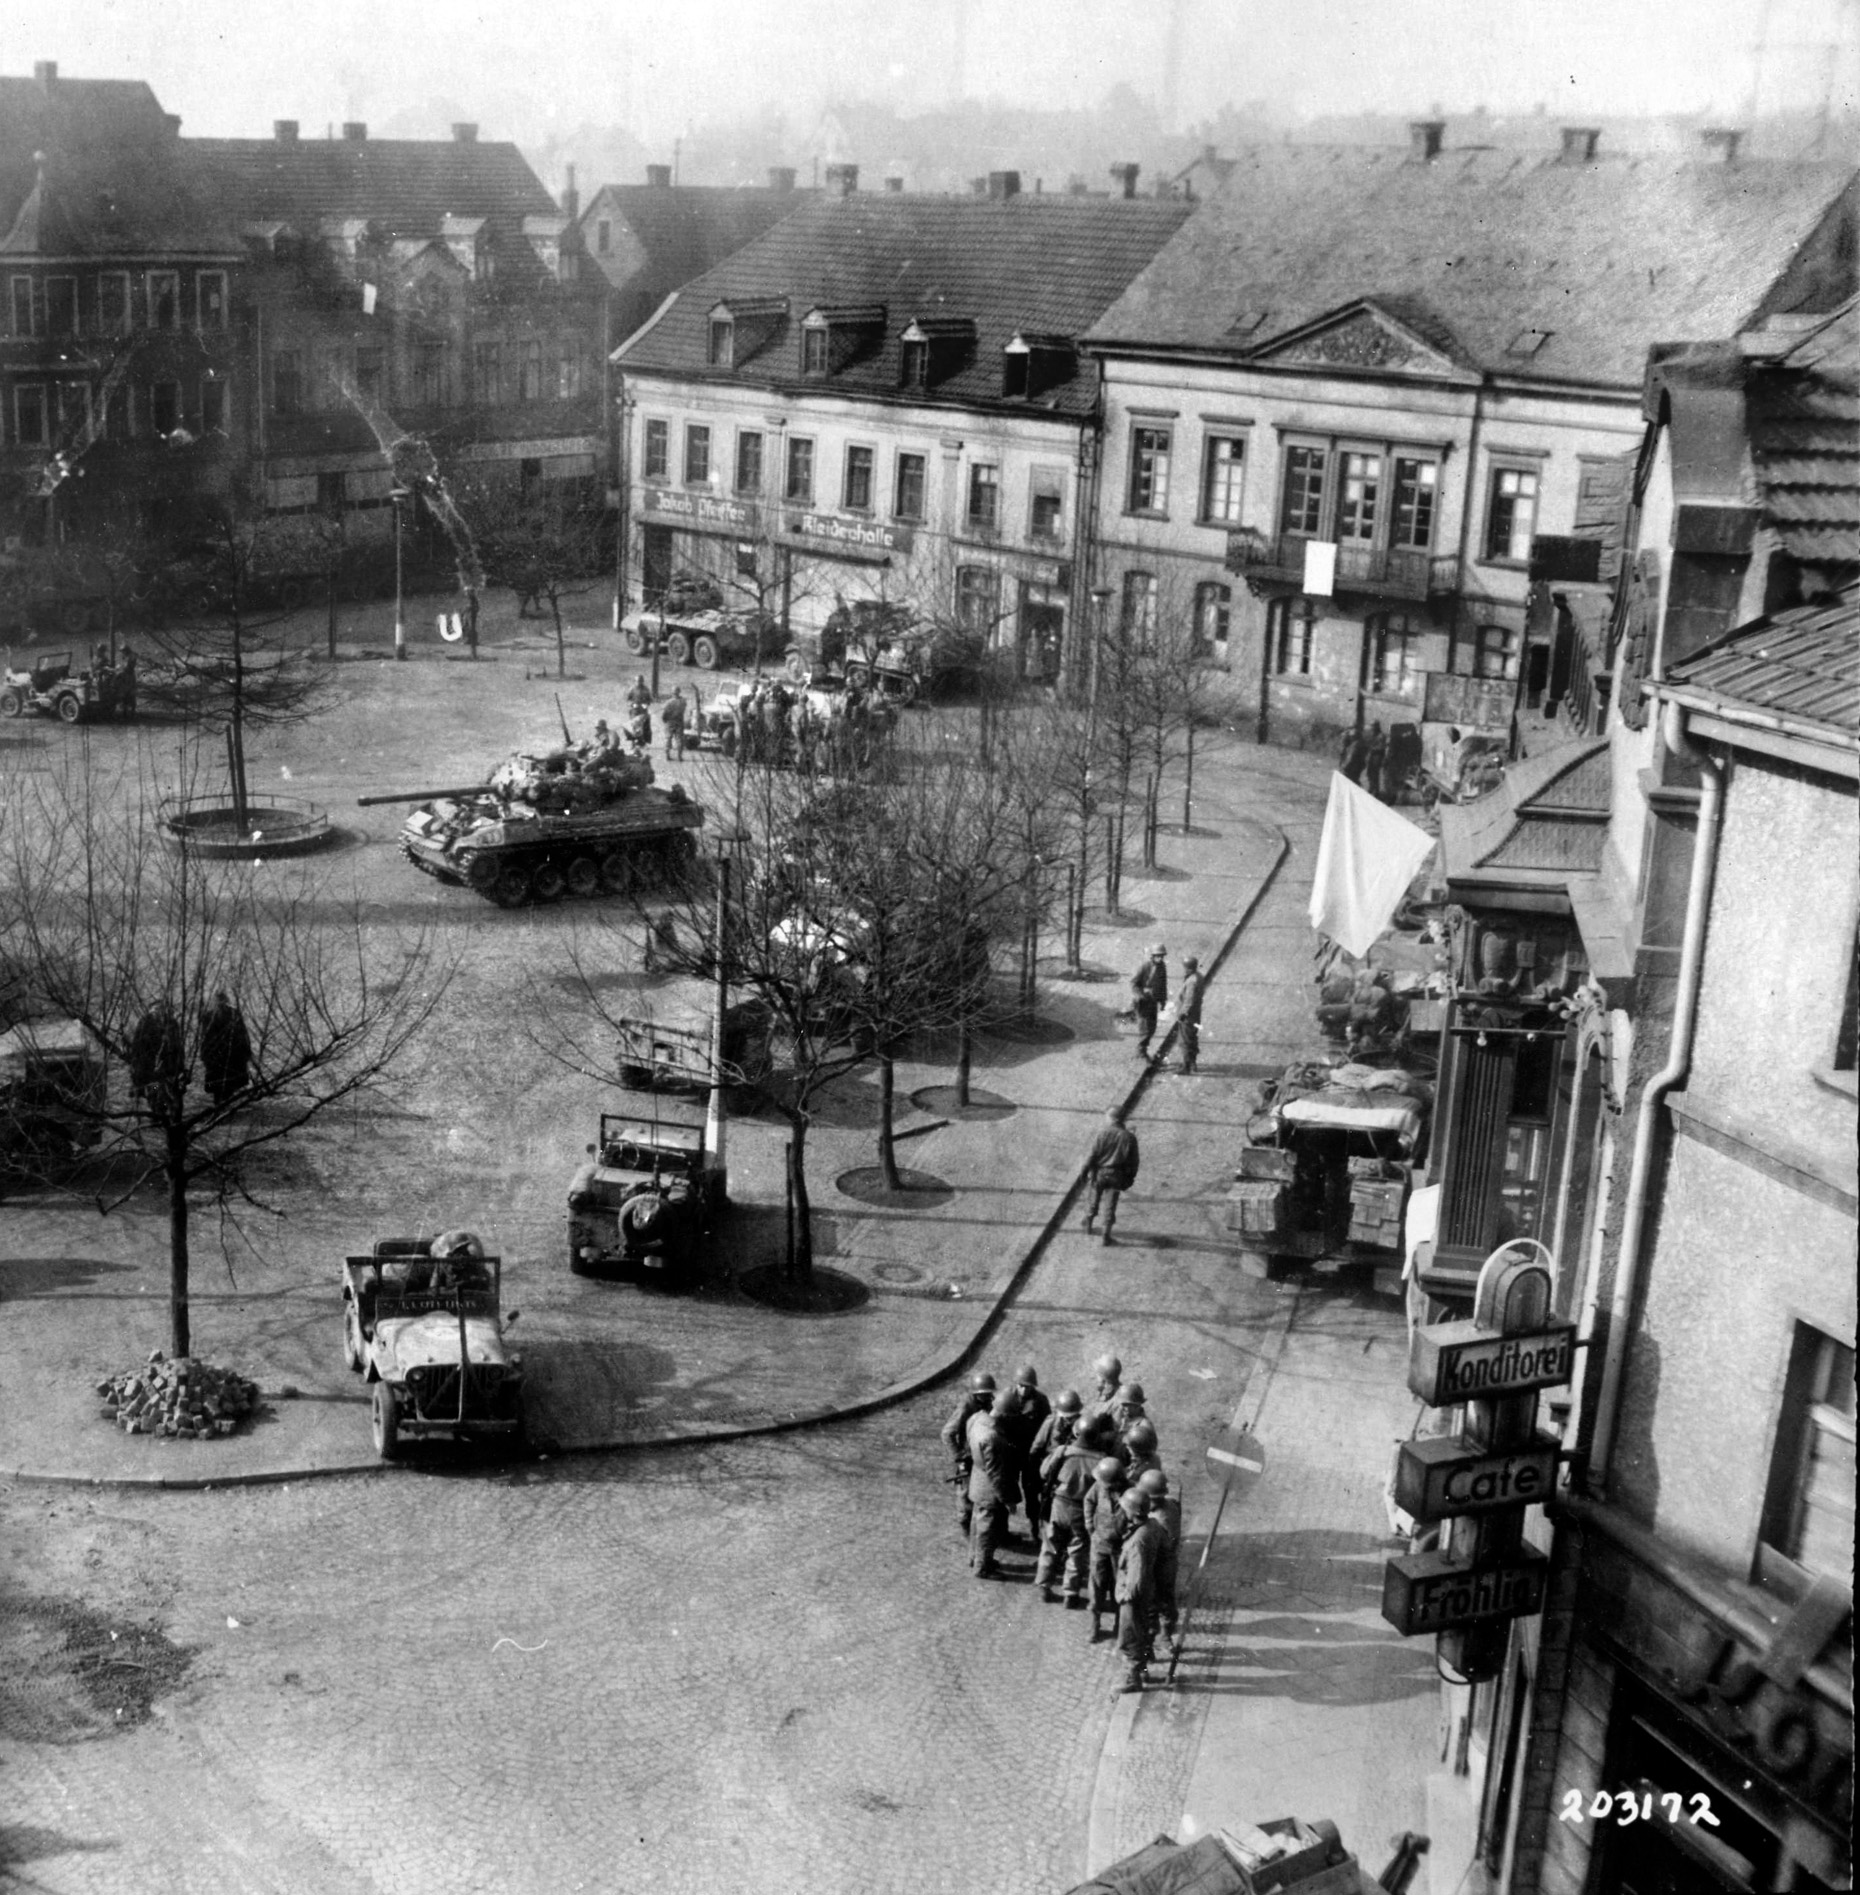 10th Armored Division troops and vehicles crowd the town square of St. Wendel, 30 miles southeast of Trier. White flags indicate the citizenry has surrendered. 